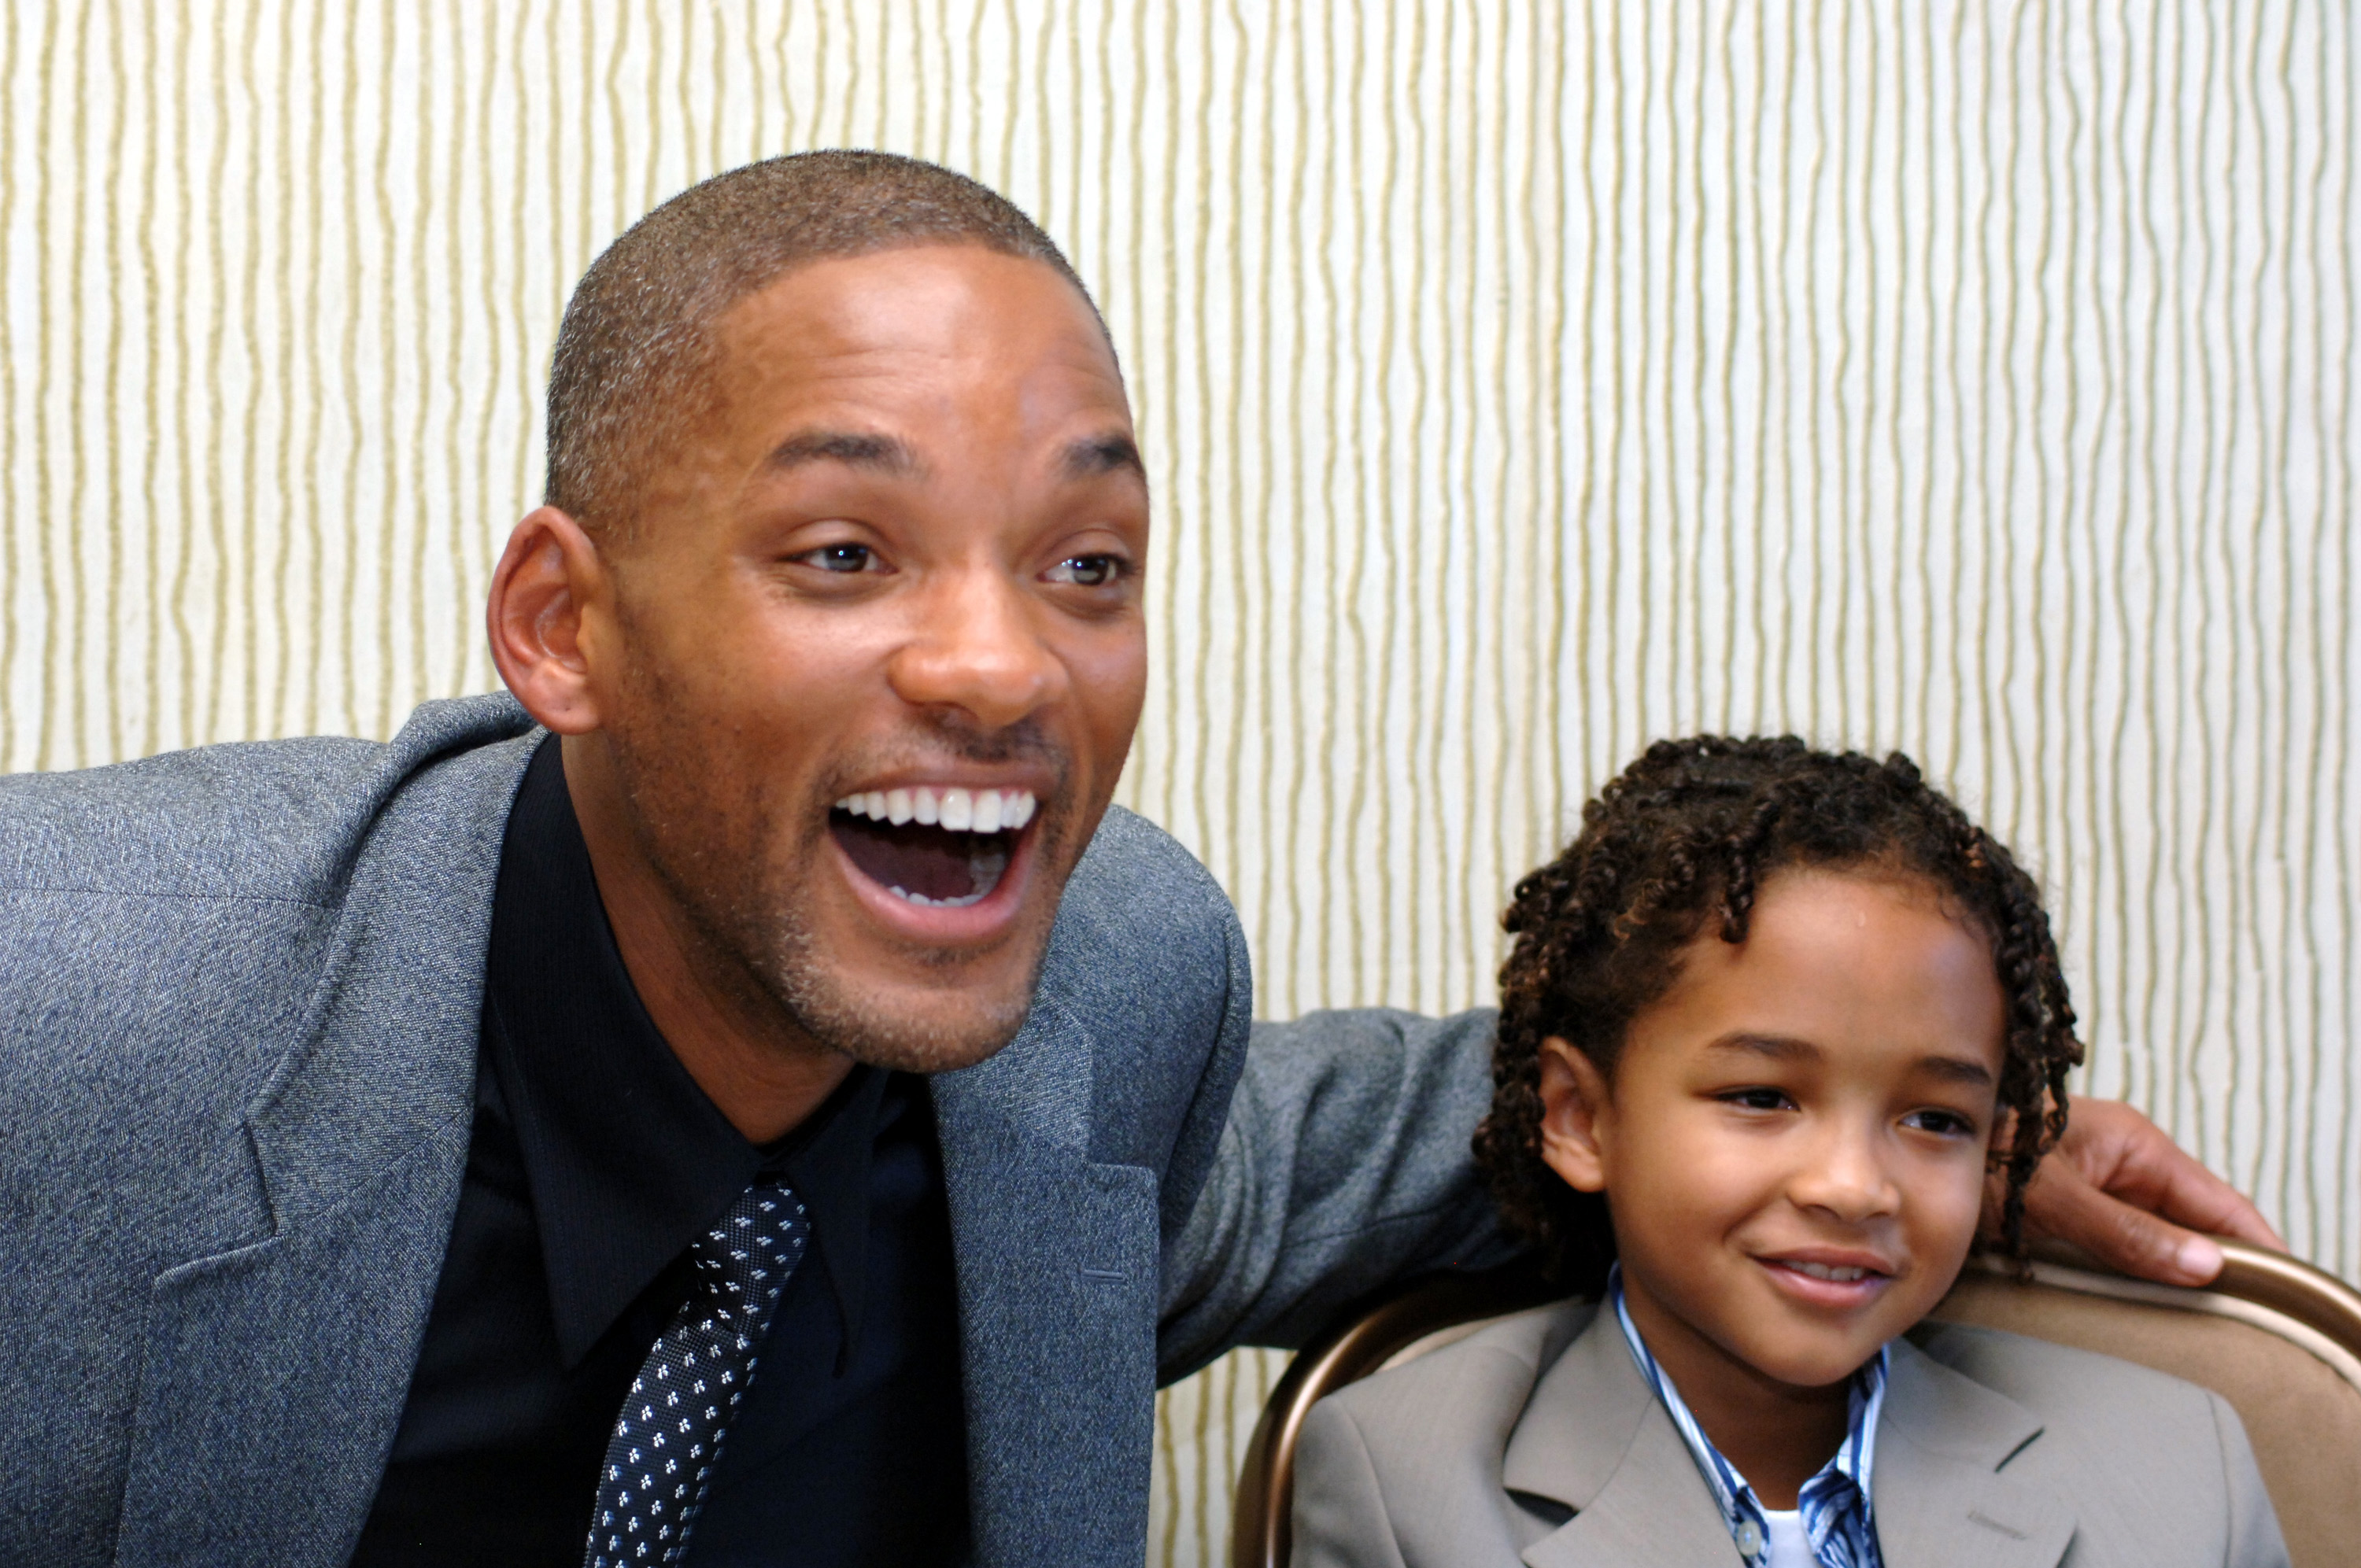 Will Smith and Jaden Smith at the Pursuit of Happyness press conference